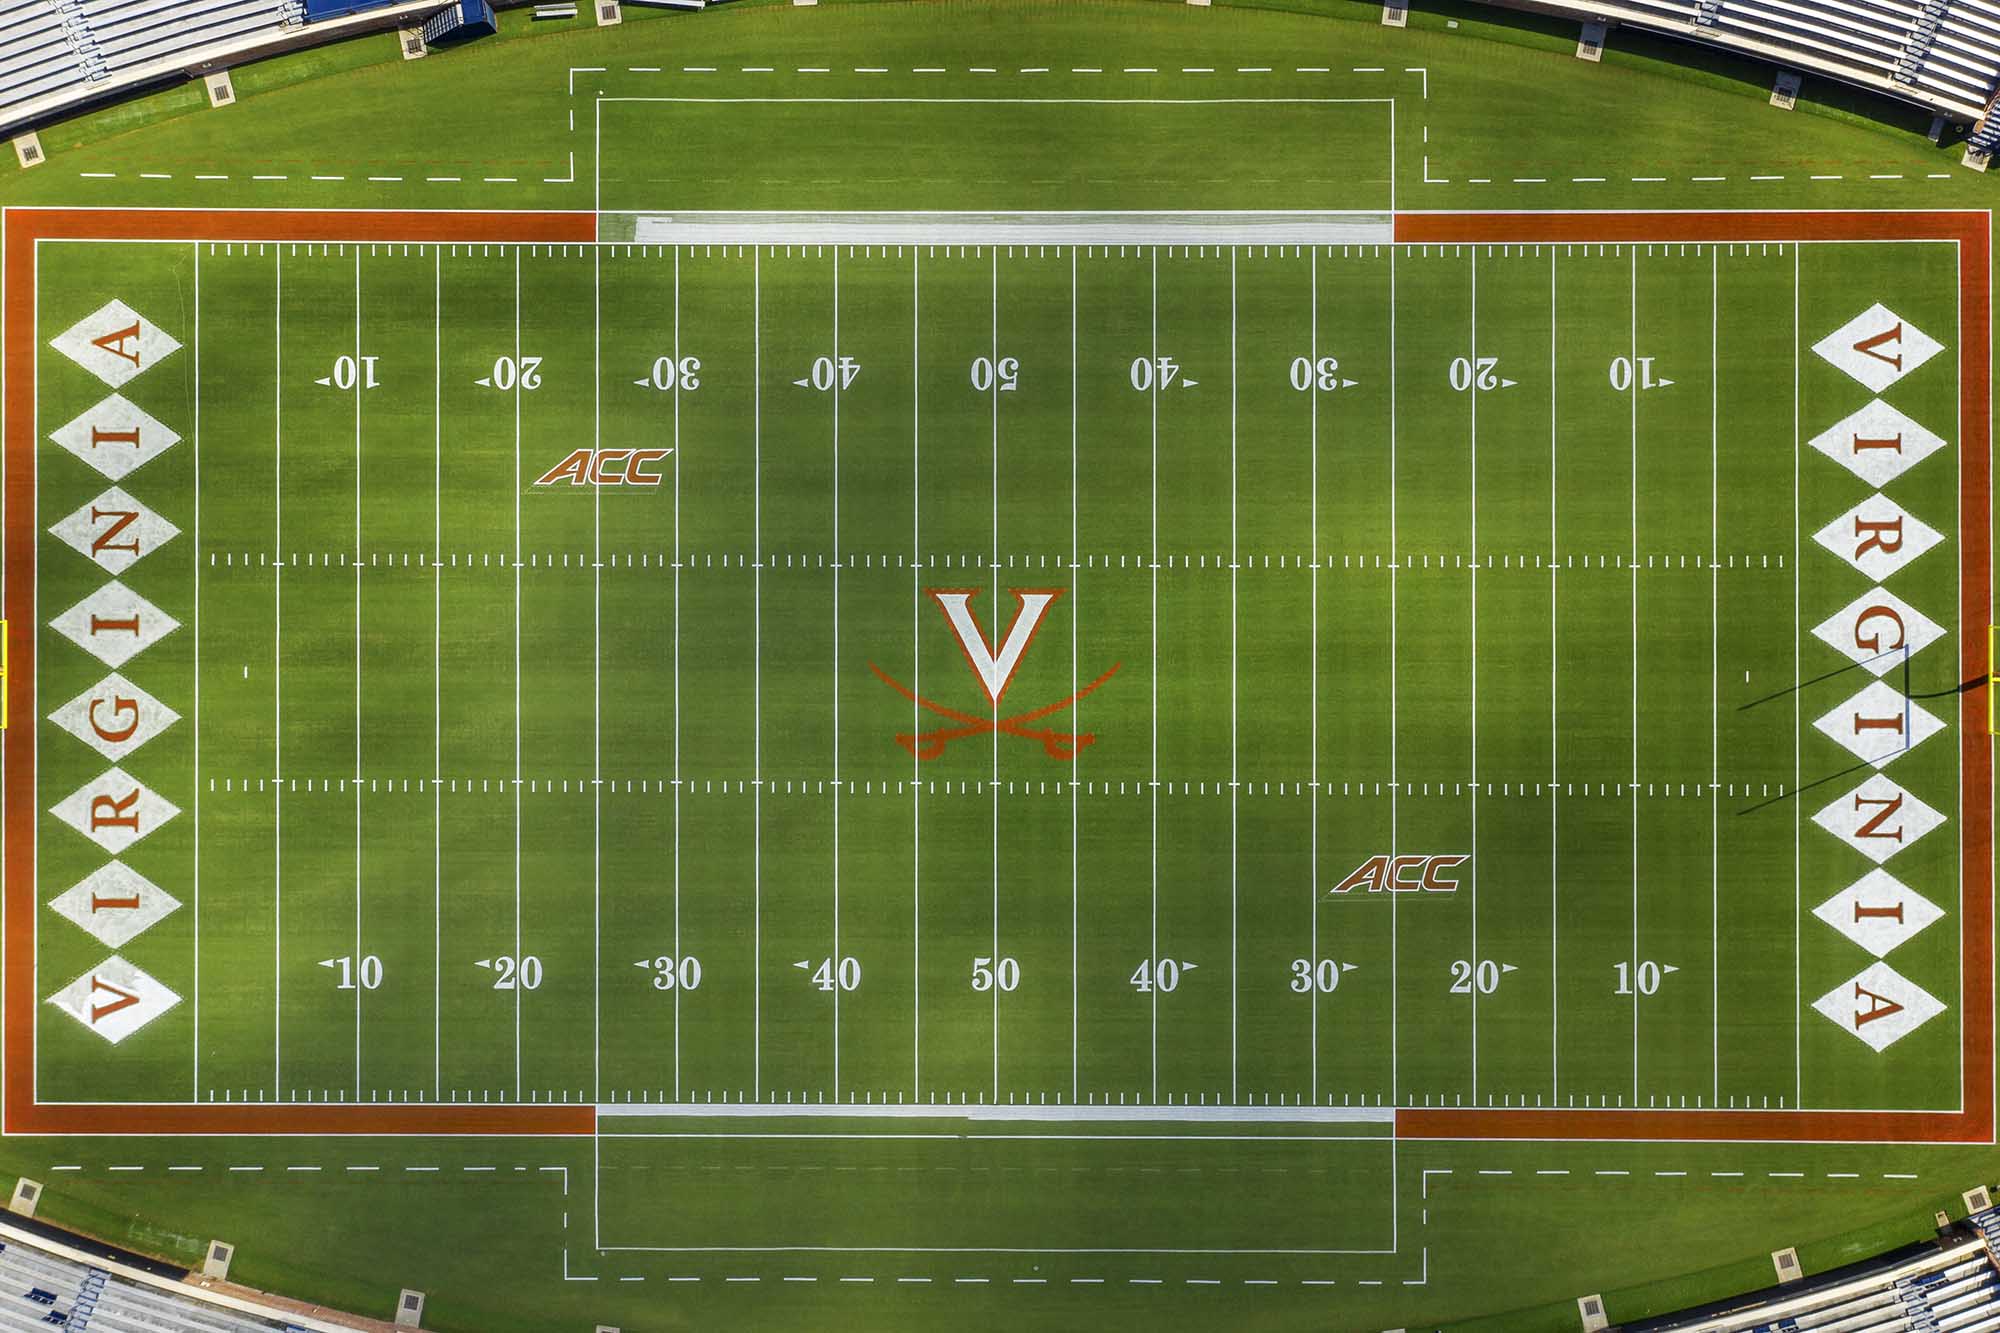 Aerial view of the UVA football field